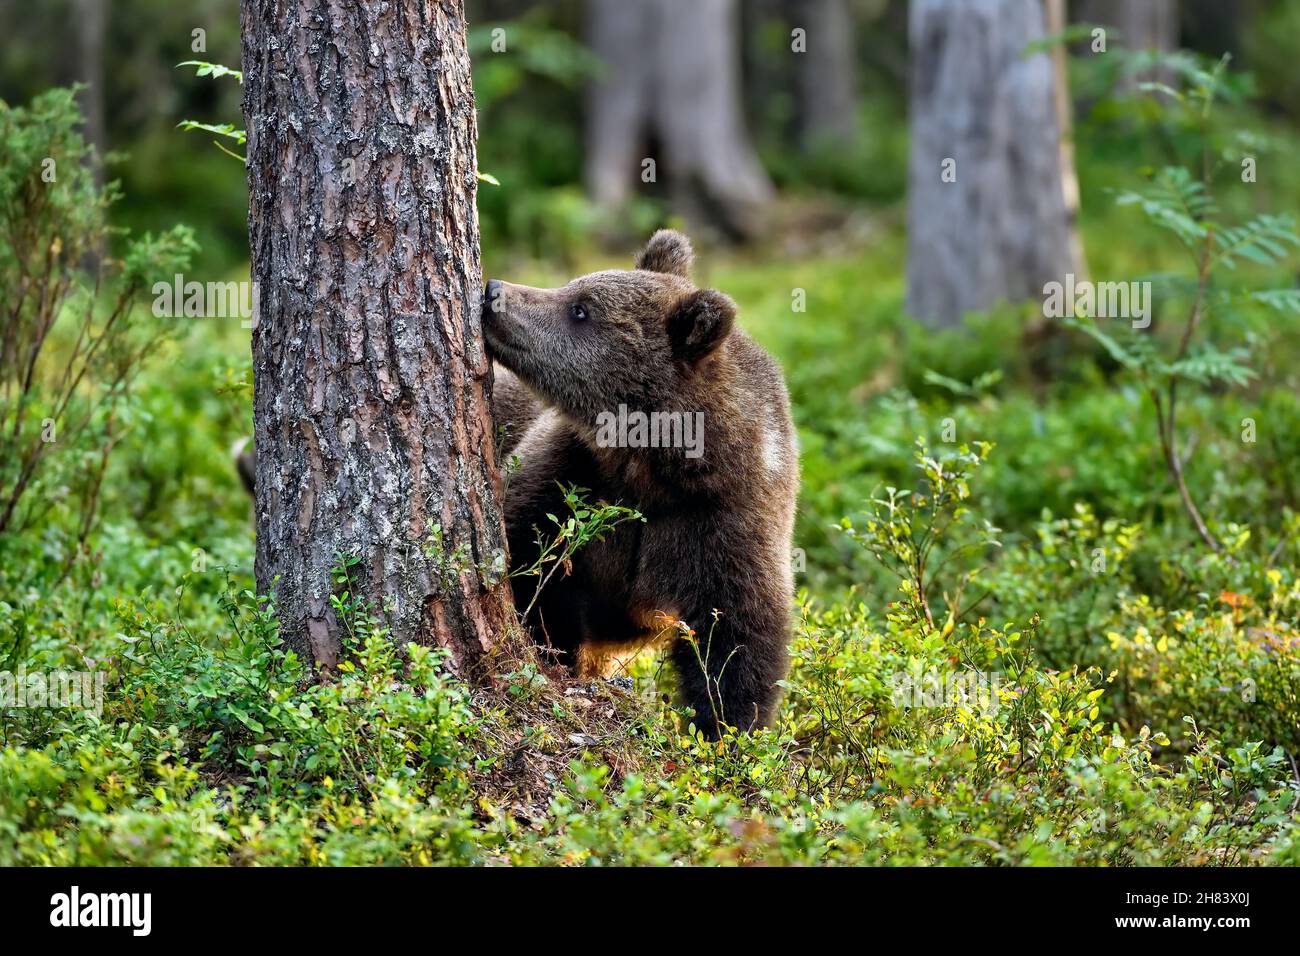 Sense of smell is important way to observe environment for bears Stock Photo